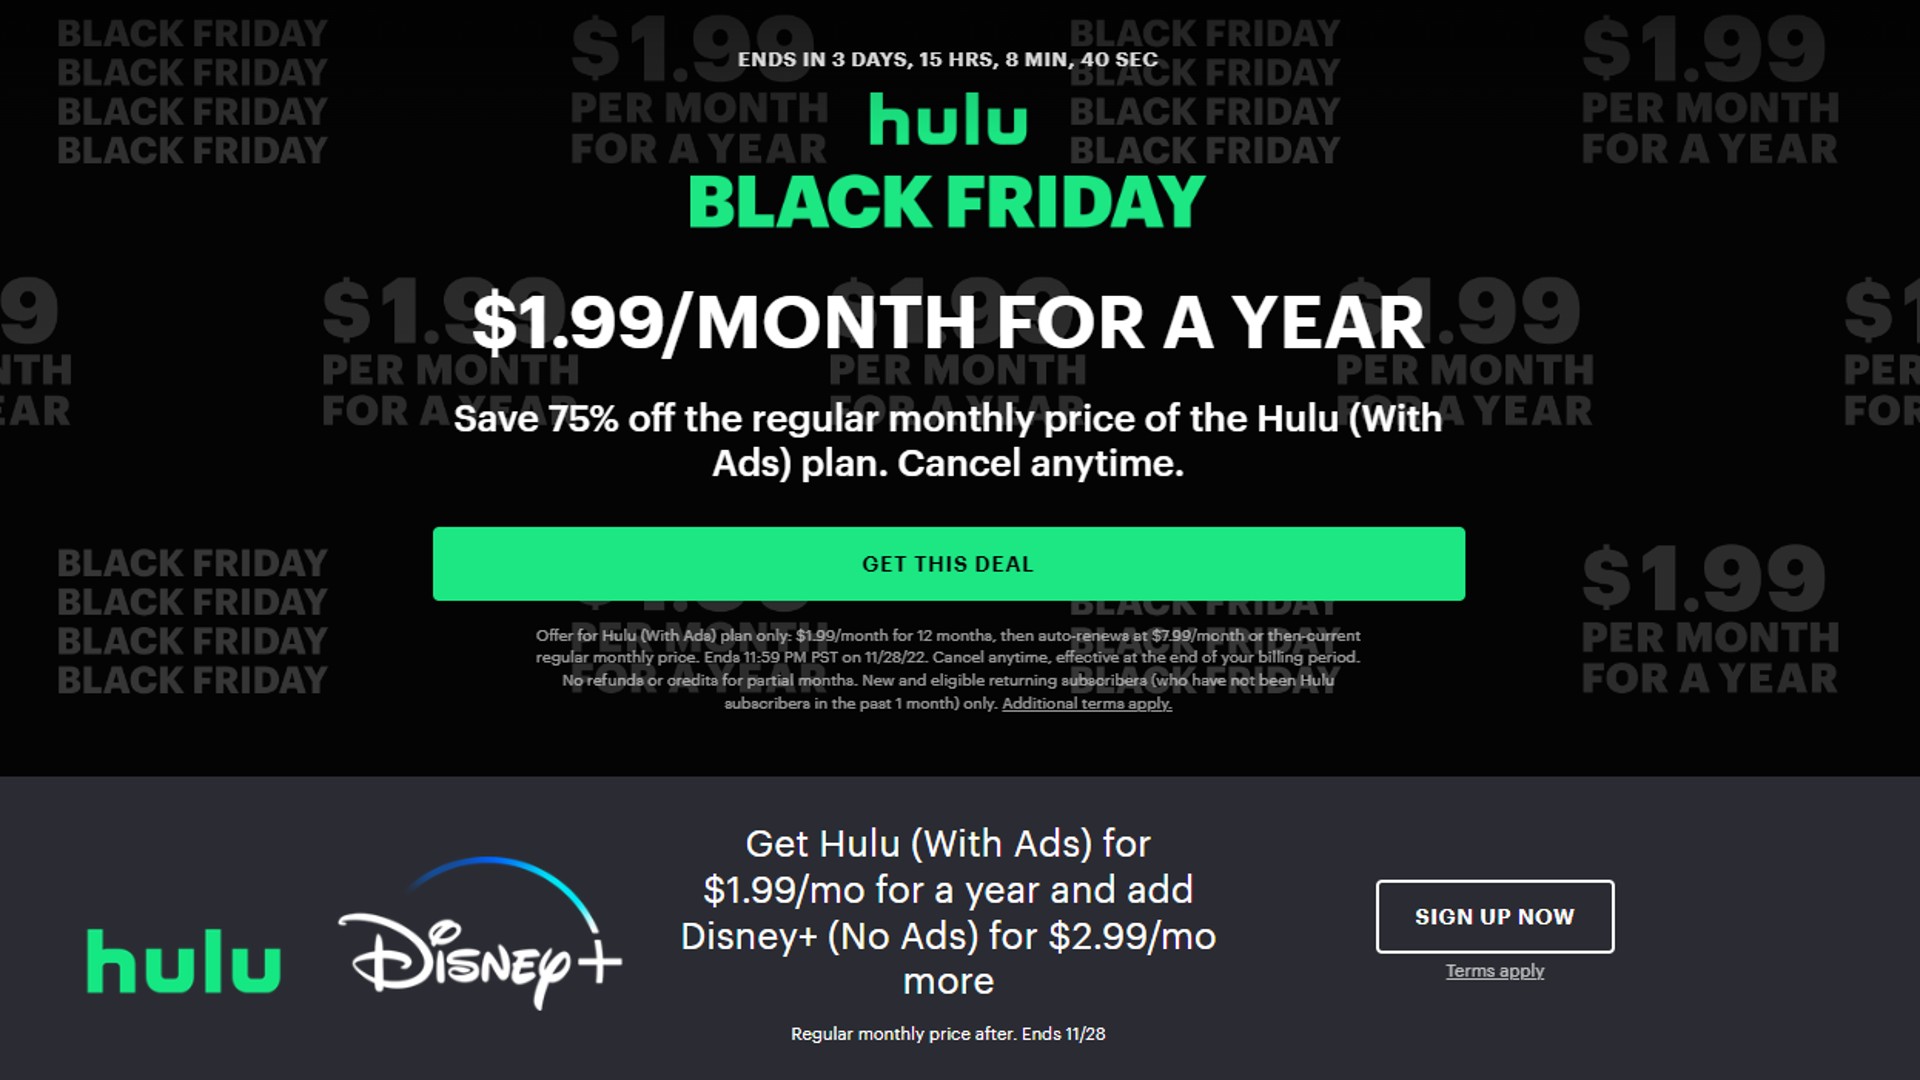 Charotar Globe Daily Hulu and Disney Plus are available in a bundle costing just $4.98/month this Black Friday 2022.